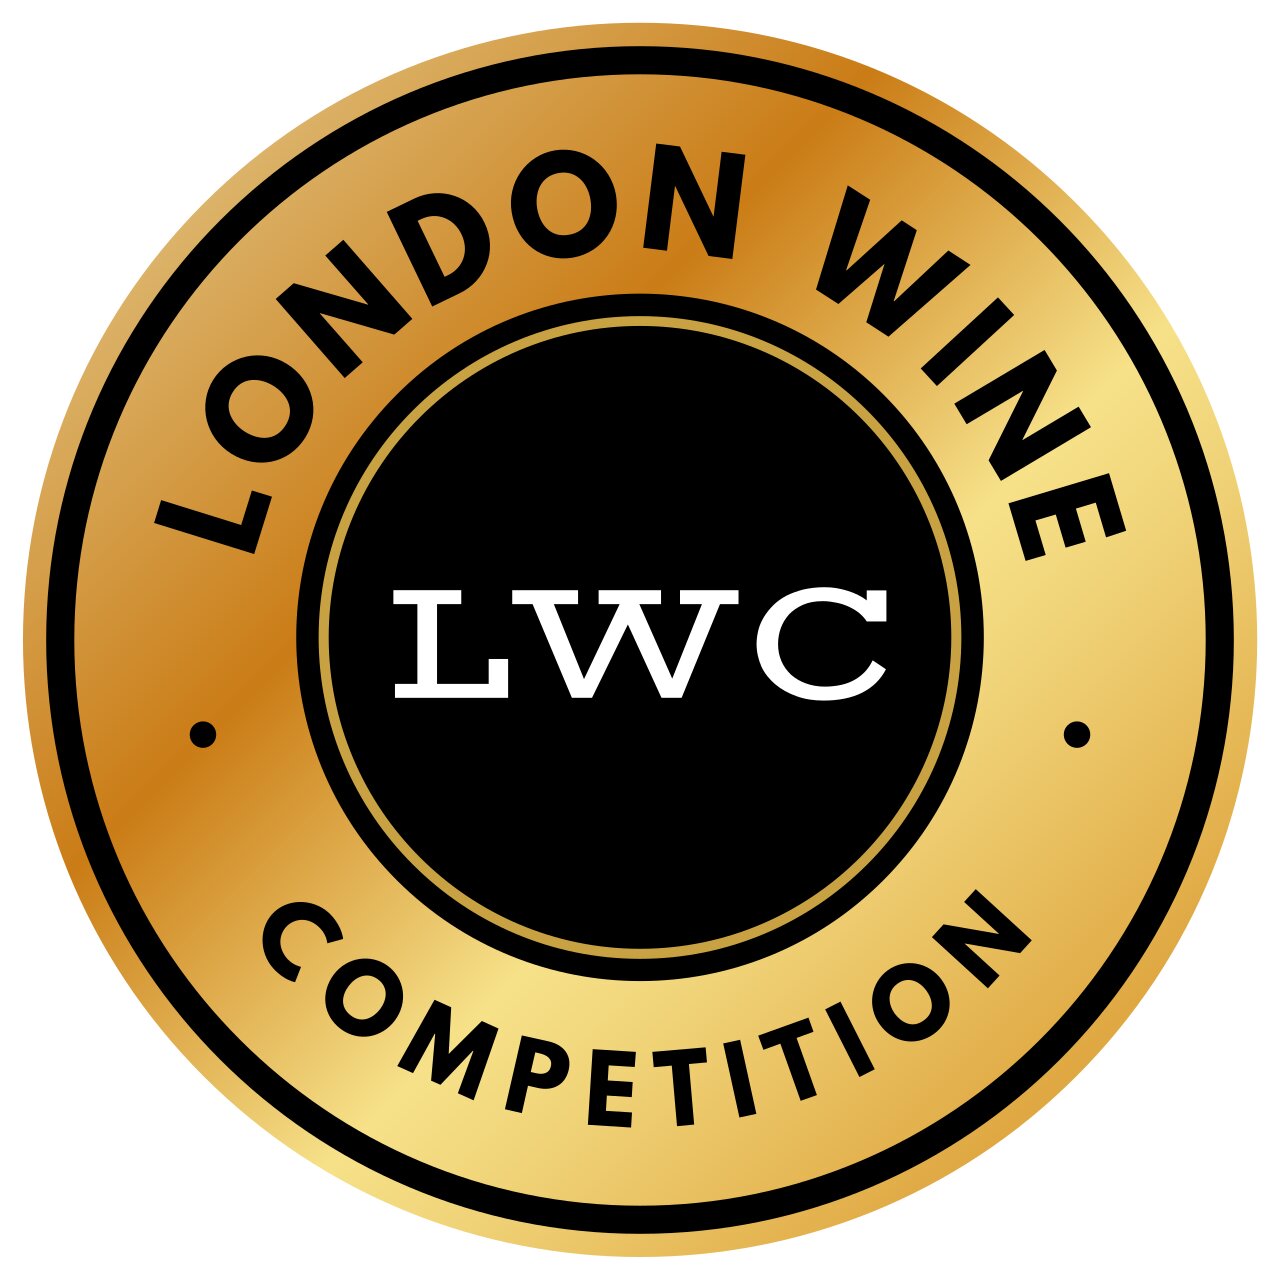 London Wine Competition Logo